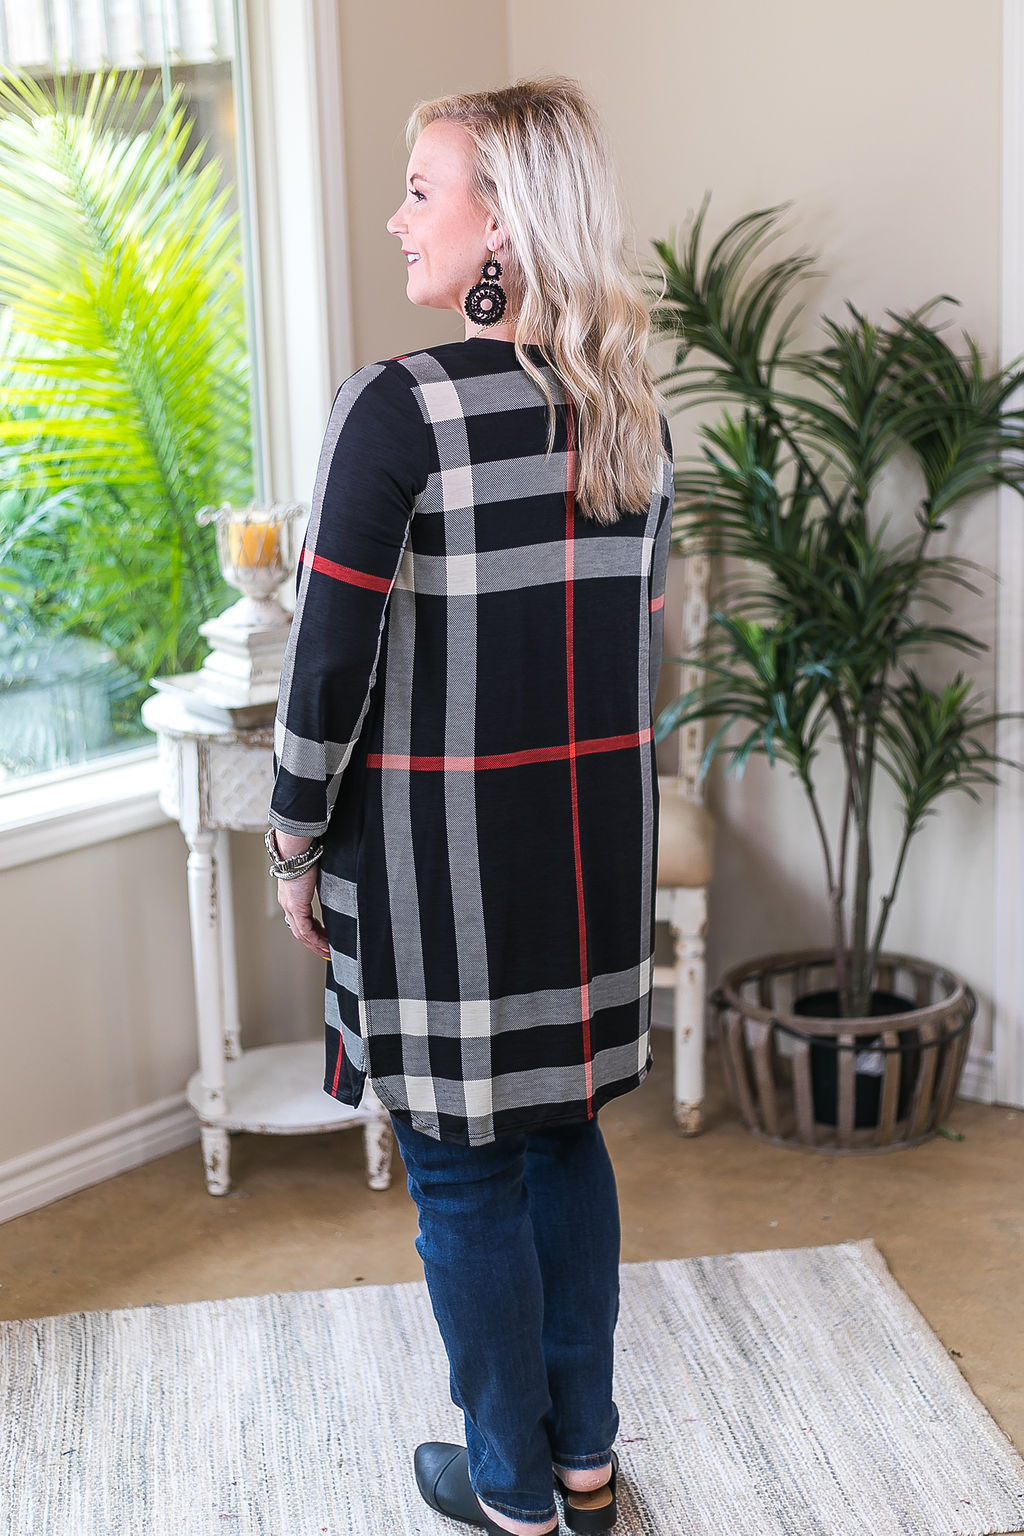 All Eyes On You Large Plaid Cardigan in Black - Giddy Up Glamour Boutique